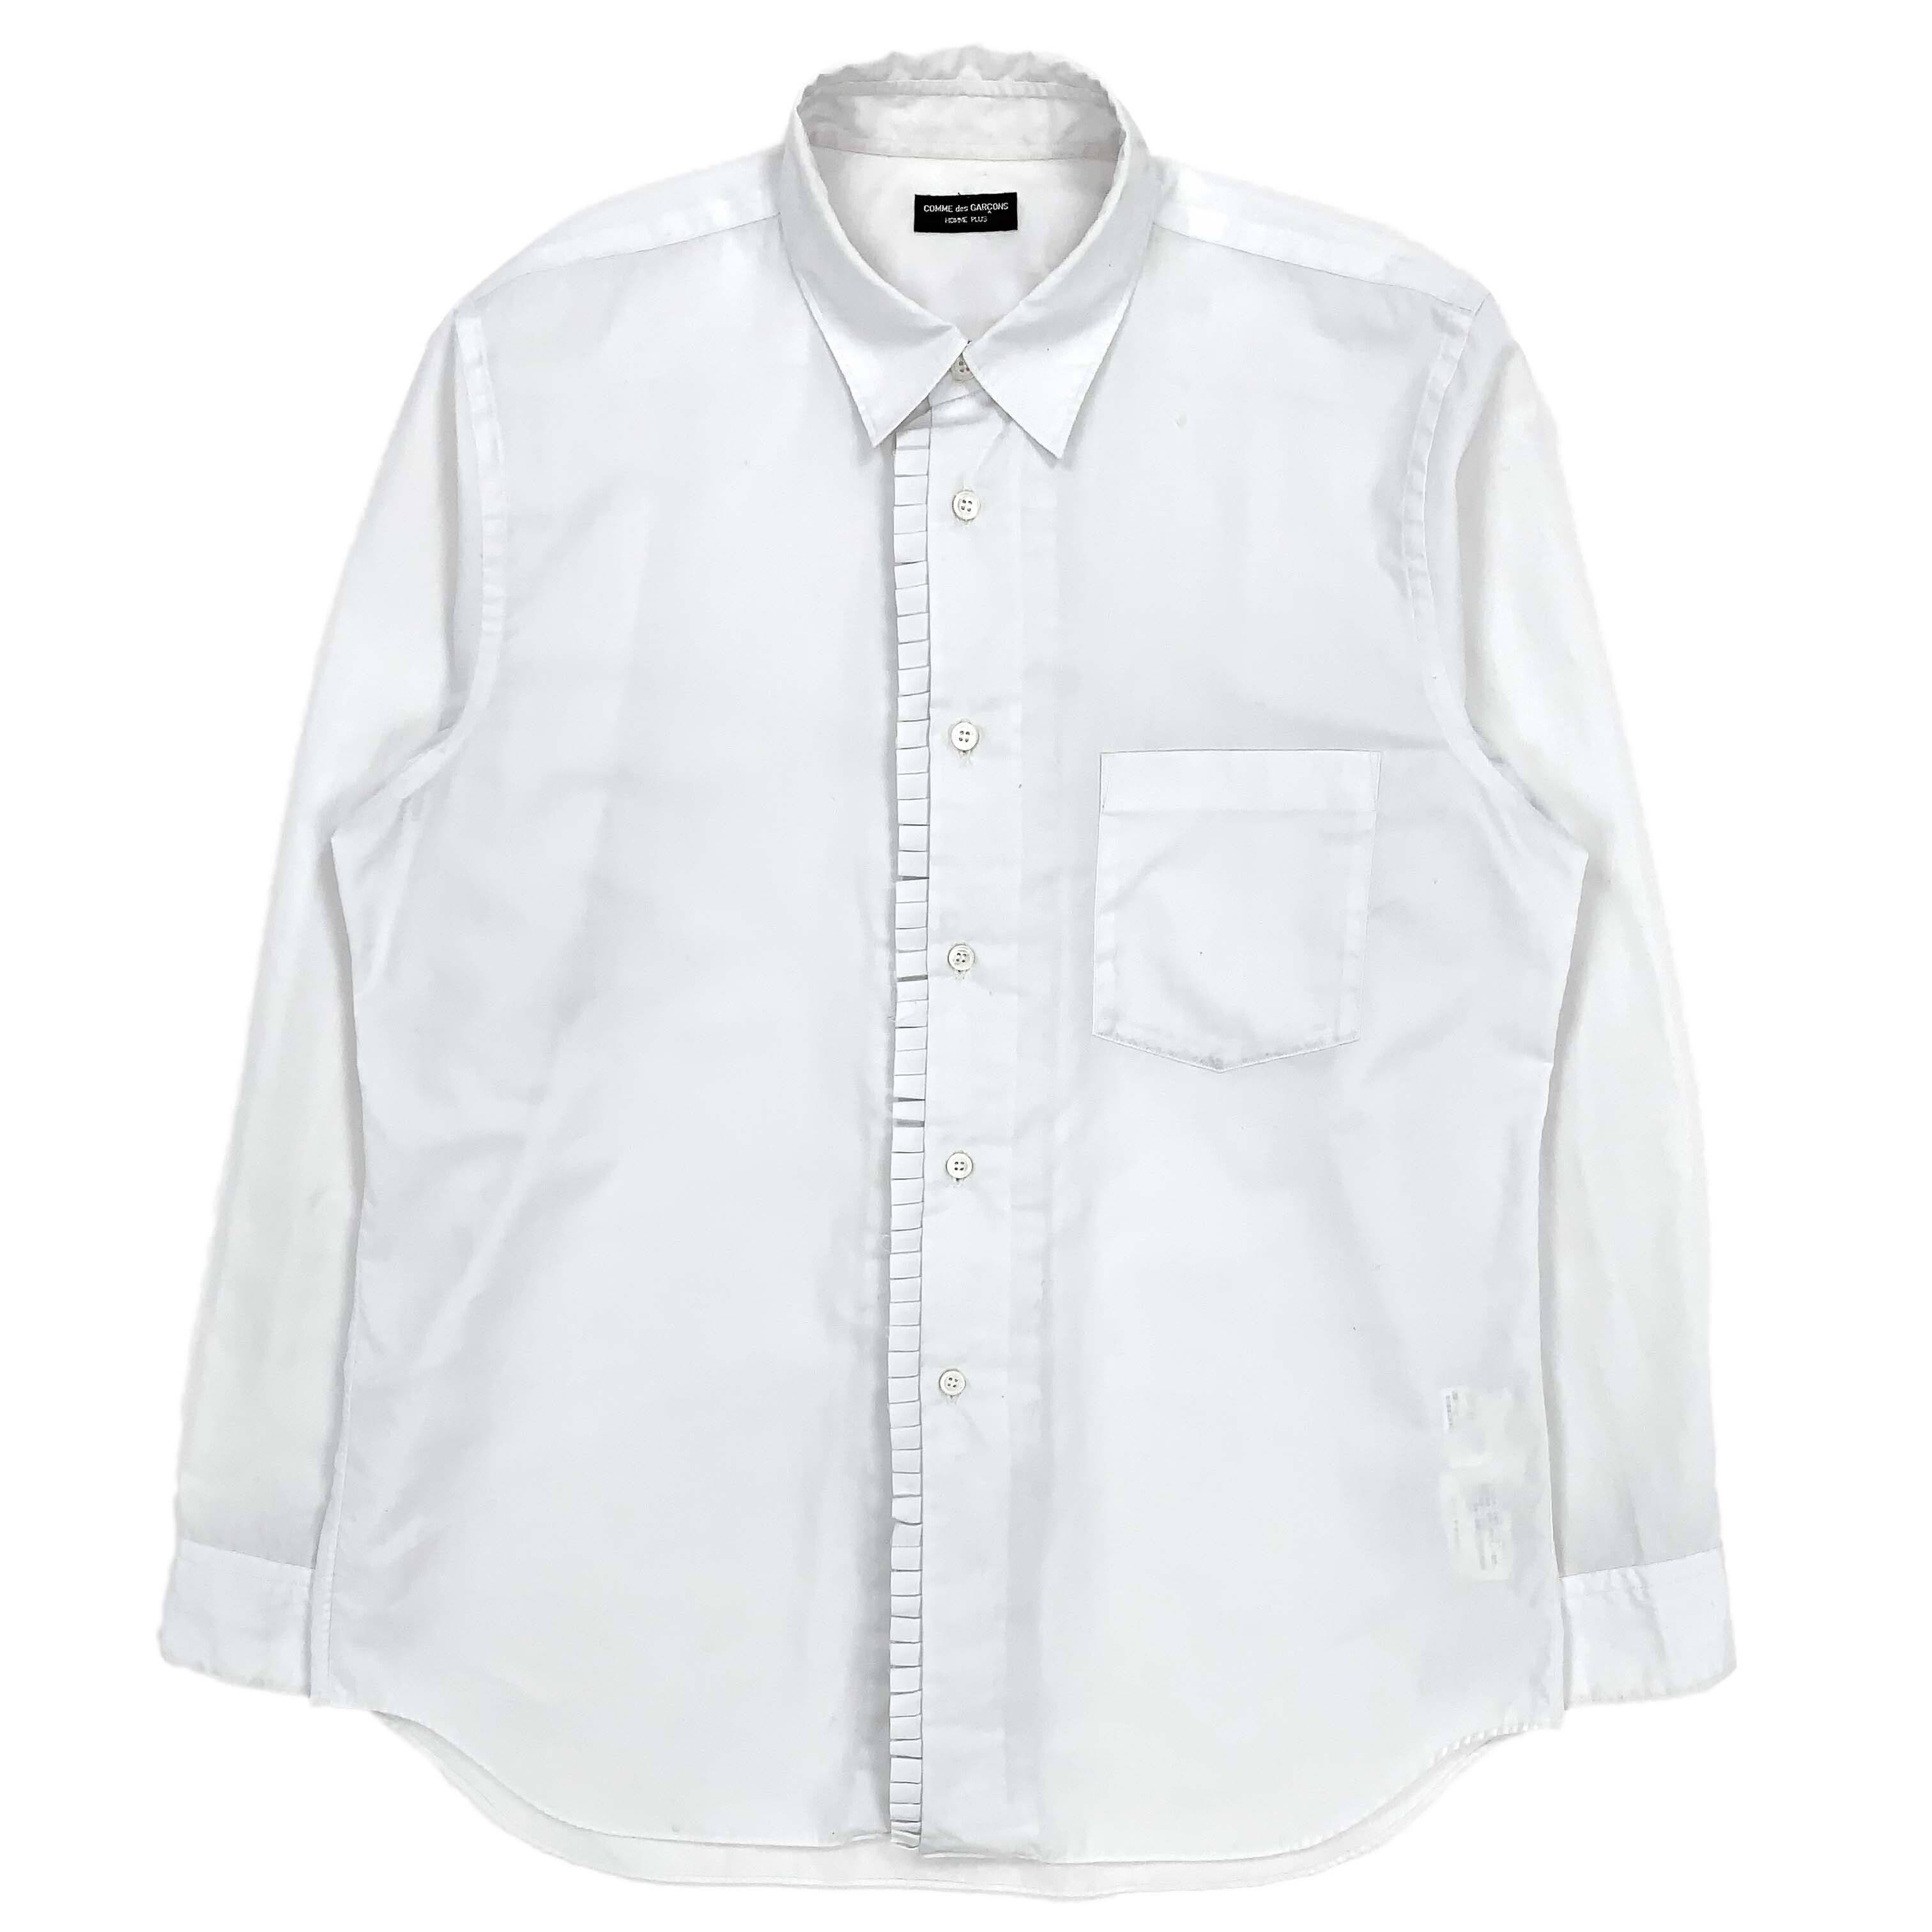 SS99 Concealed Polyester-Cotton Ruffle Shirt - 2